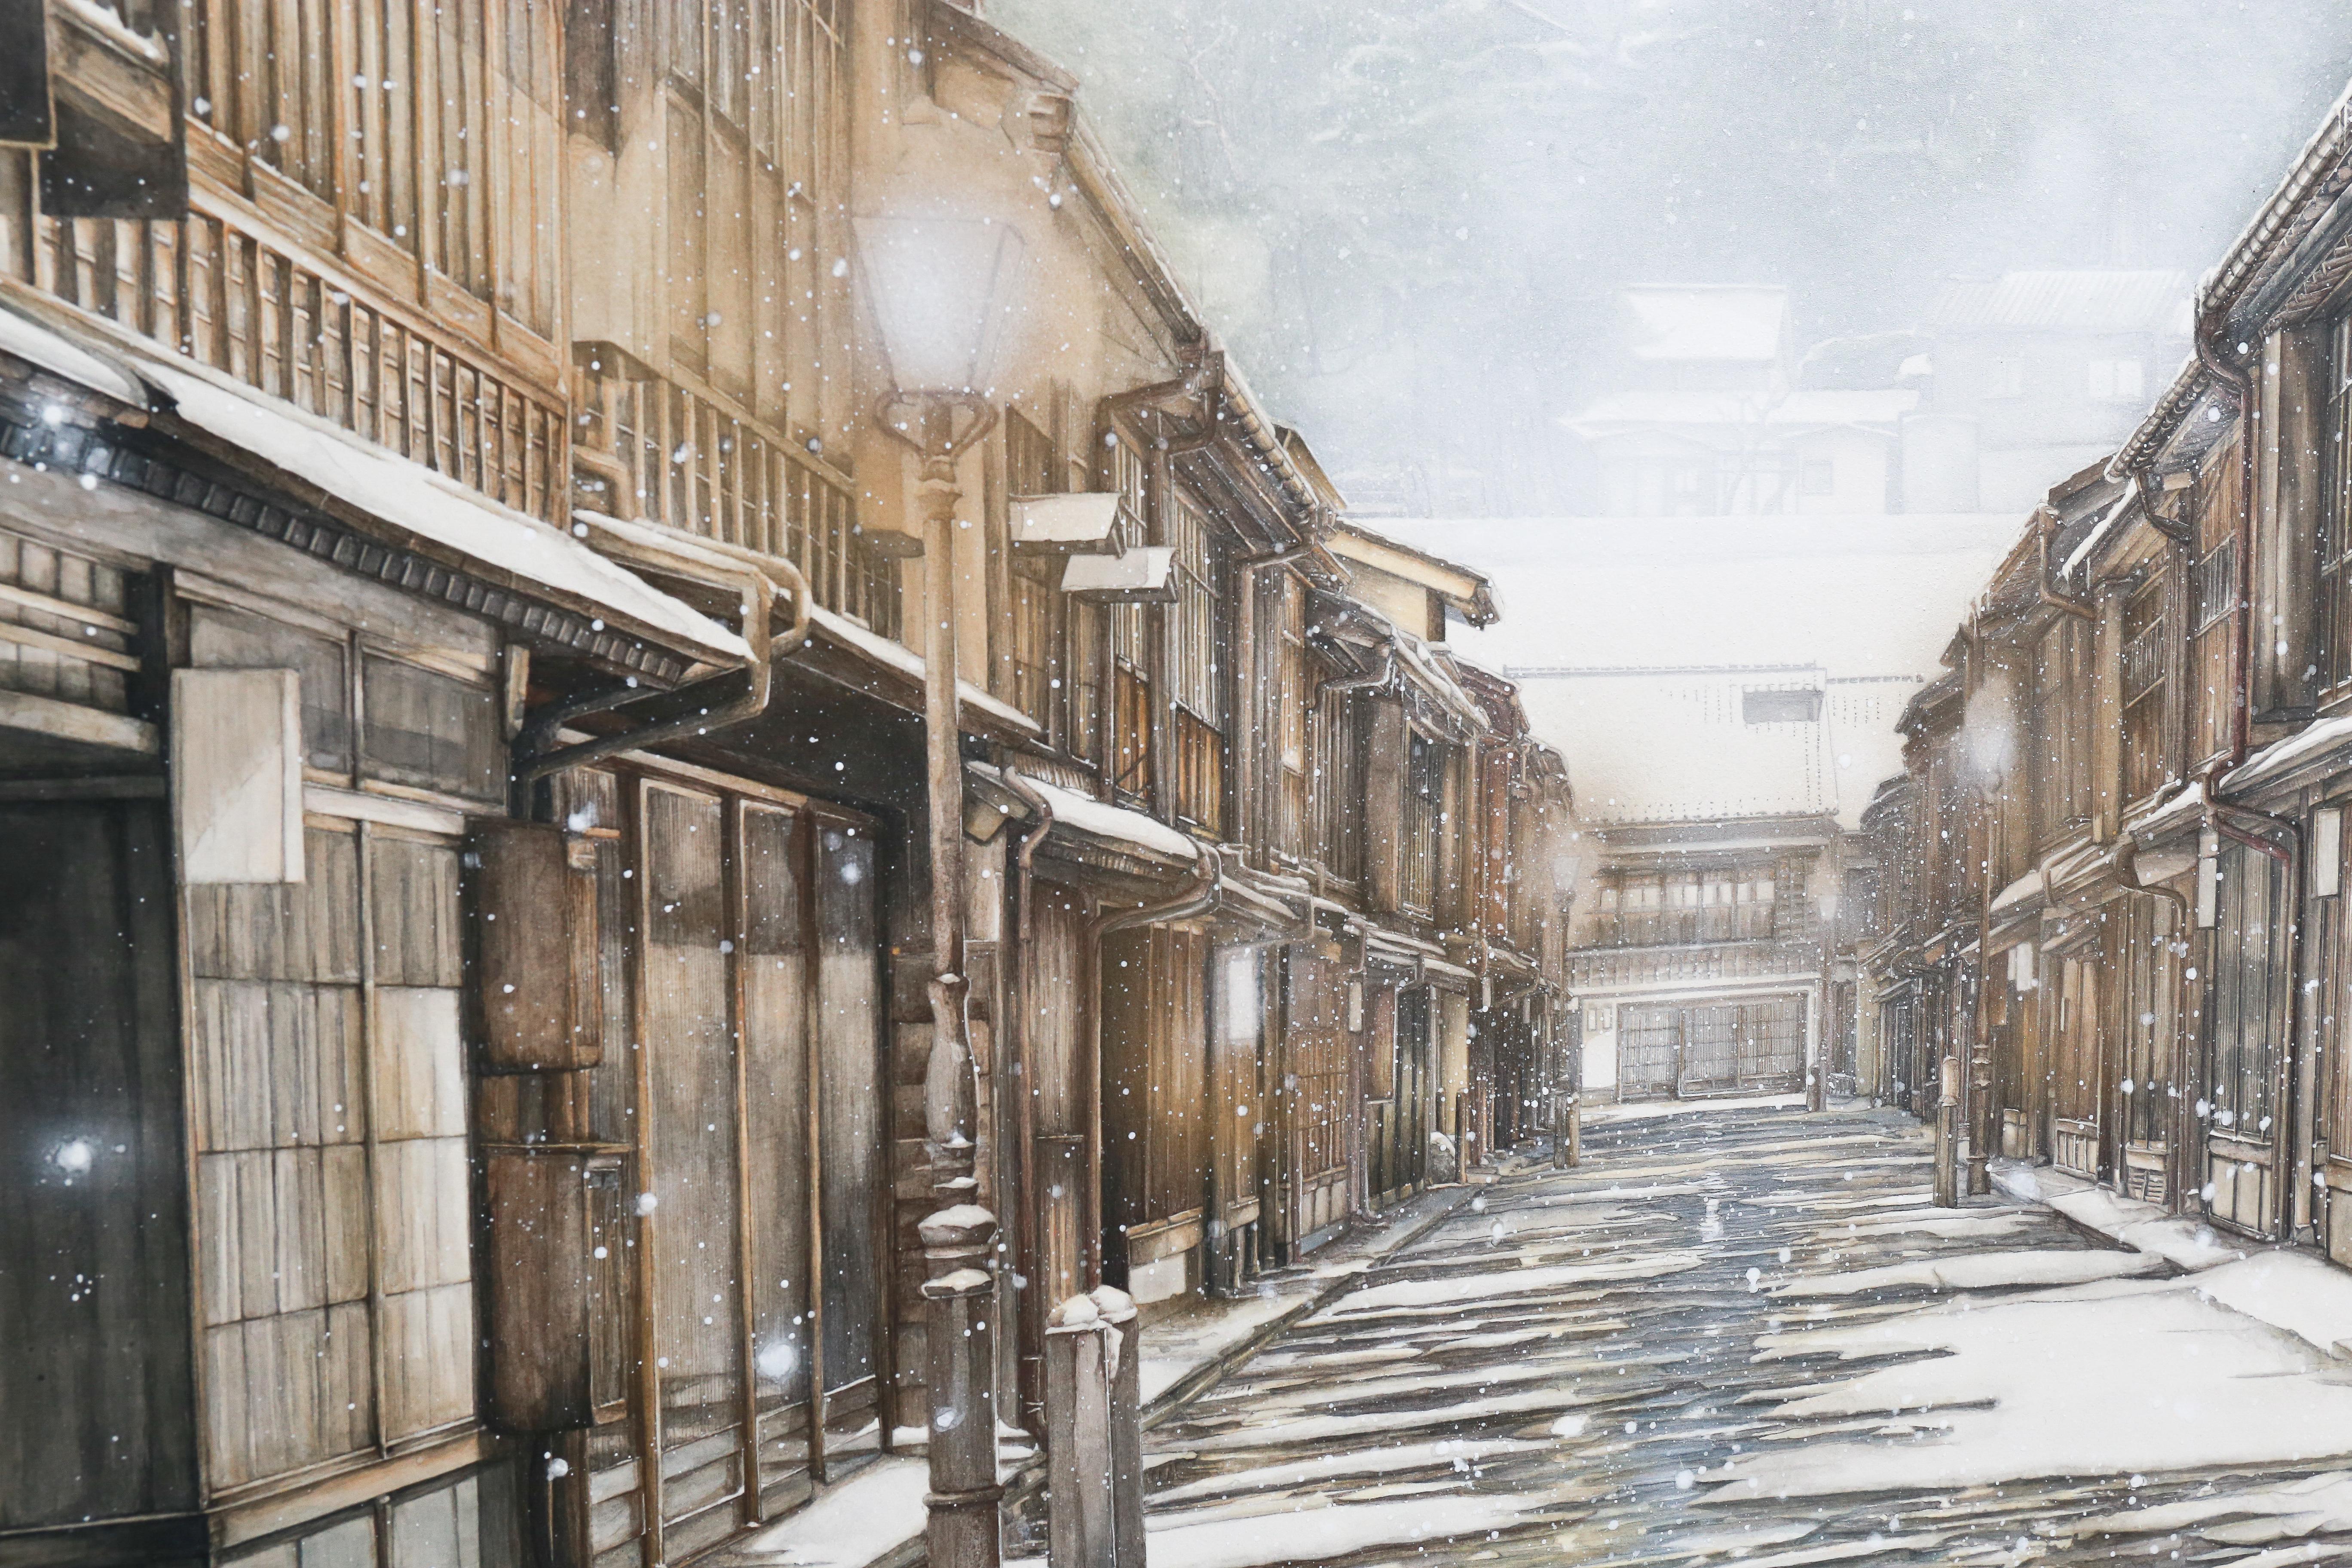 Kanazawa - Japanese Cityscape Painting in 24k Gold and Minerals, Realism, Winter For Sale 2